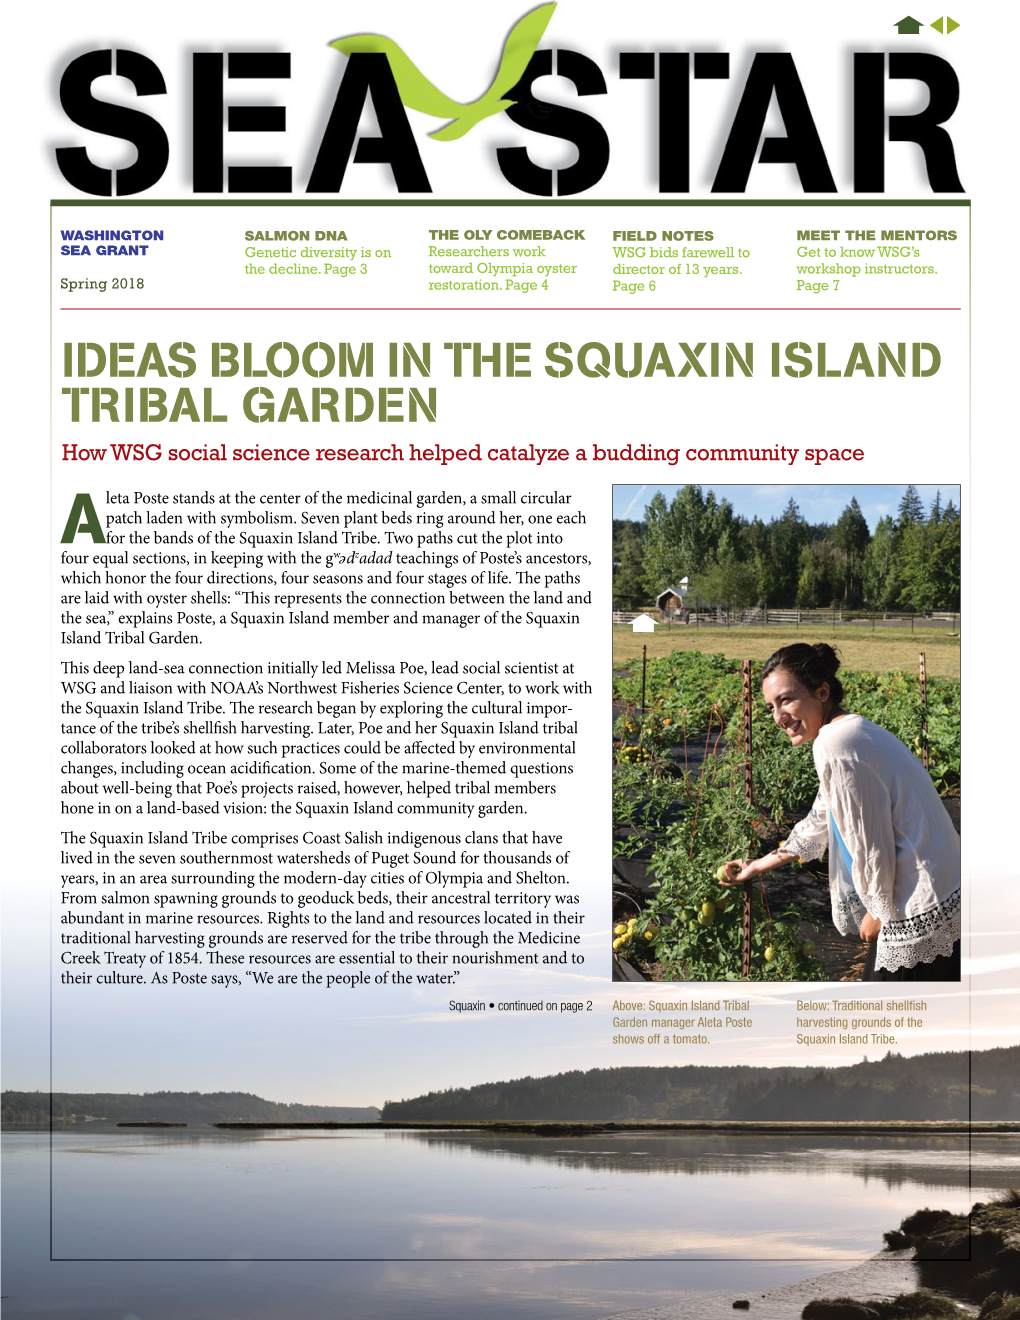 IDEAS BLOOM in the SQUAXIN ISLAND TRIBAL GARDEN How WSG Social Science Research Helped Catalyze a Budding Community Space